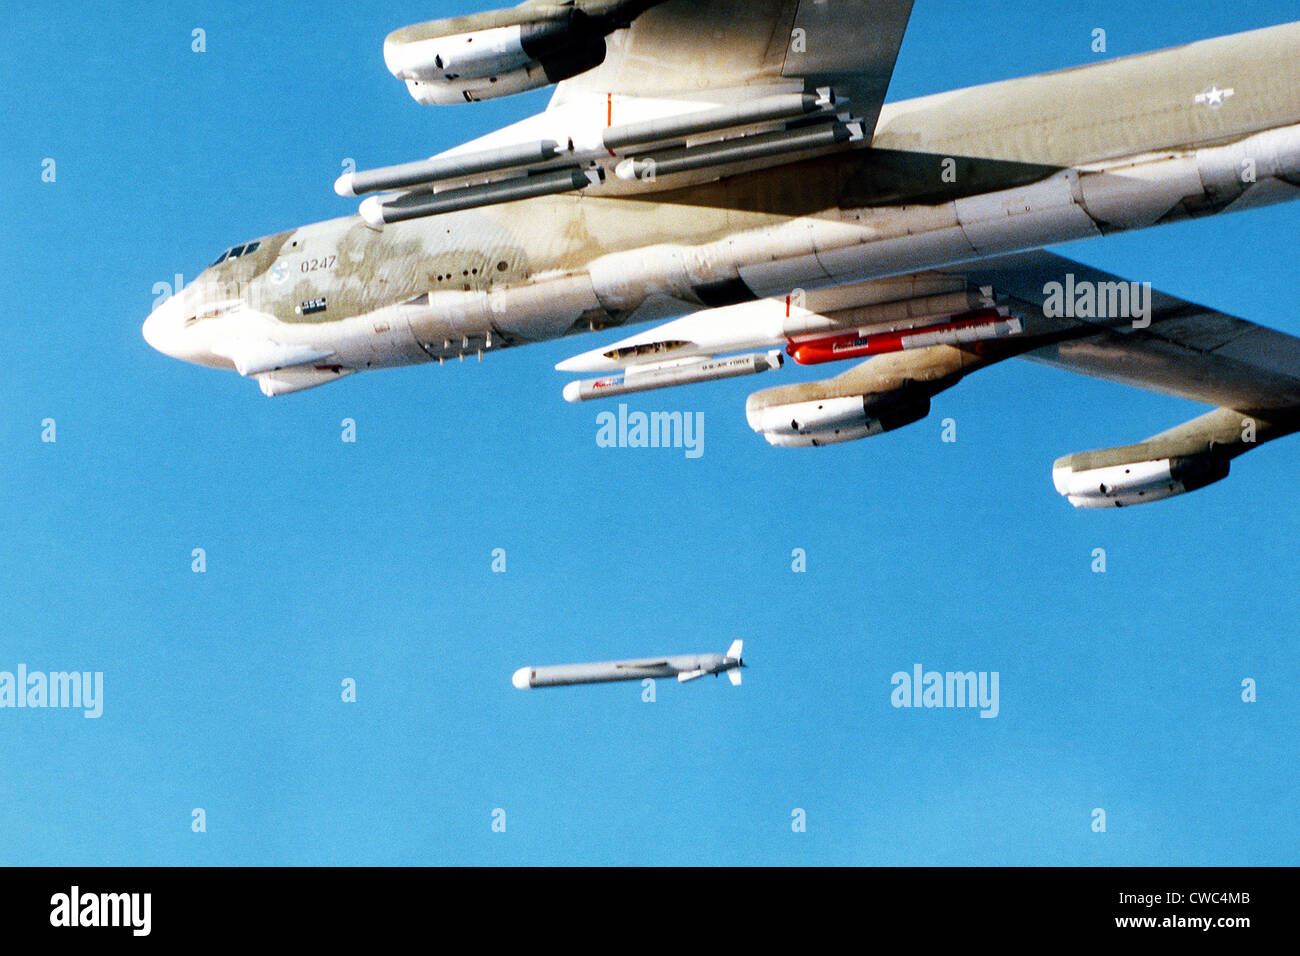 B-52 aircraft releasing an Tomahawk air-launched cruise missile. Dec. 6 1979. (BSLOC 2011 12 208) Stock Photo